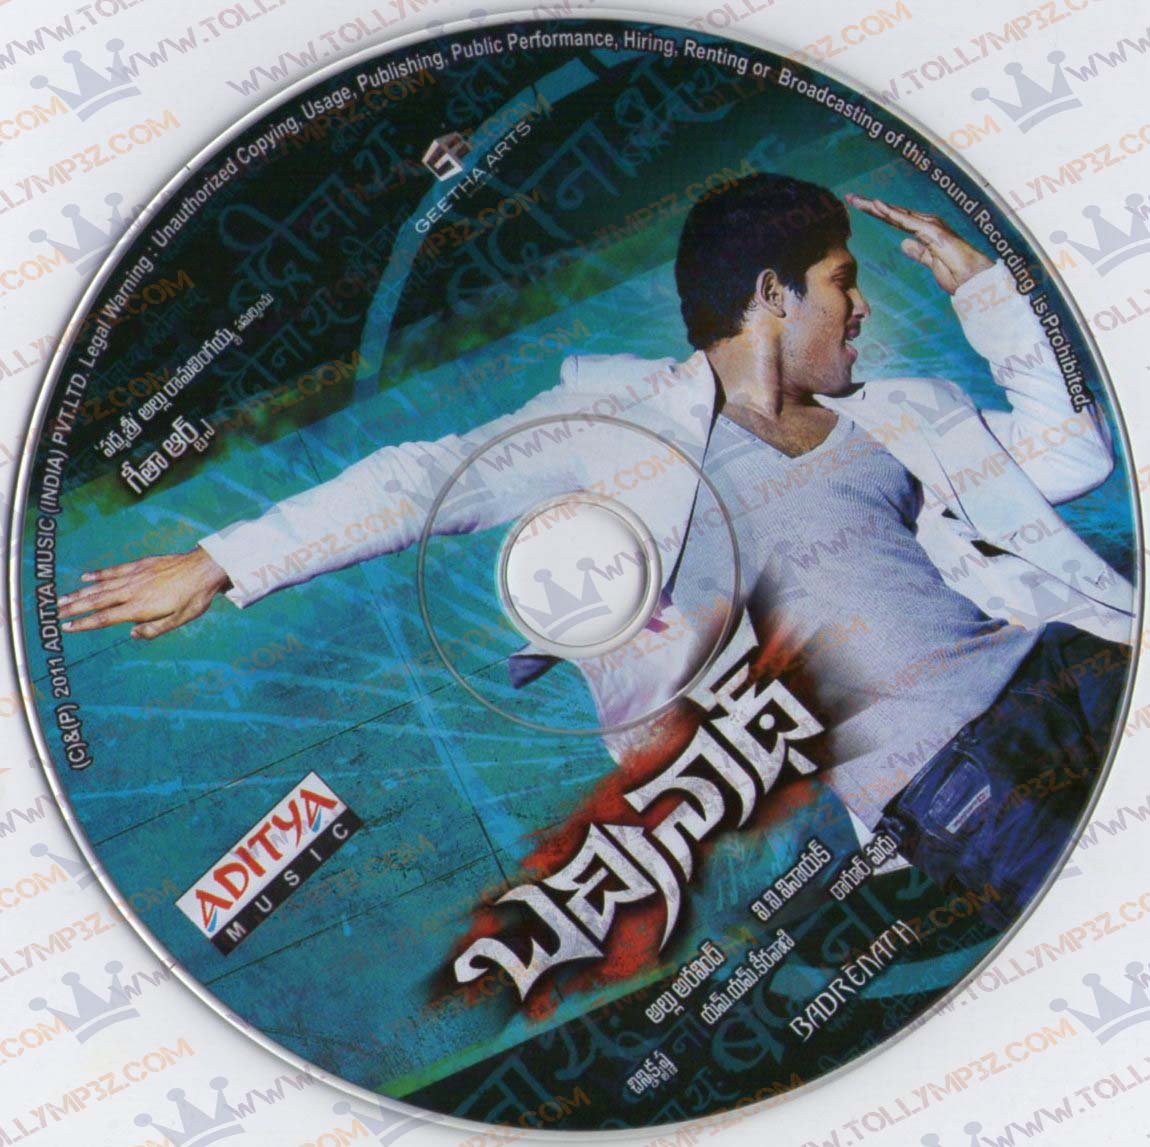 Download song Telugu Mp3 Songs Free Download For Android Mobile (6.25 MB) - Mp3 Free Download